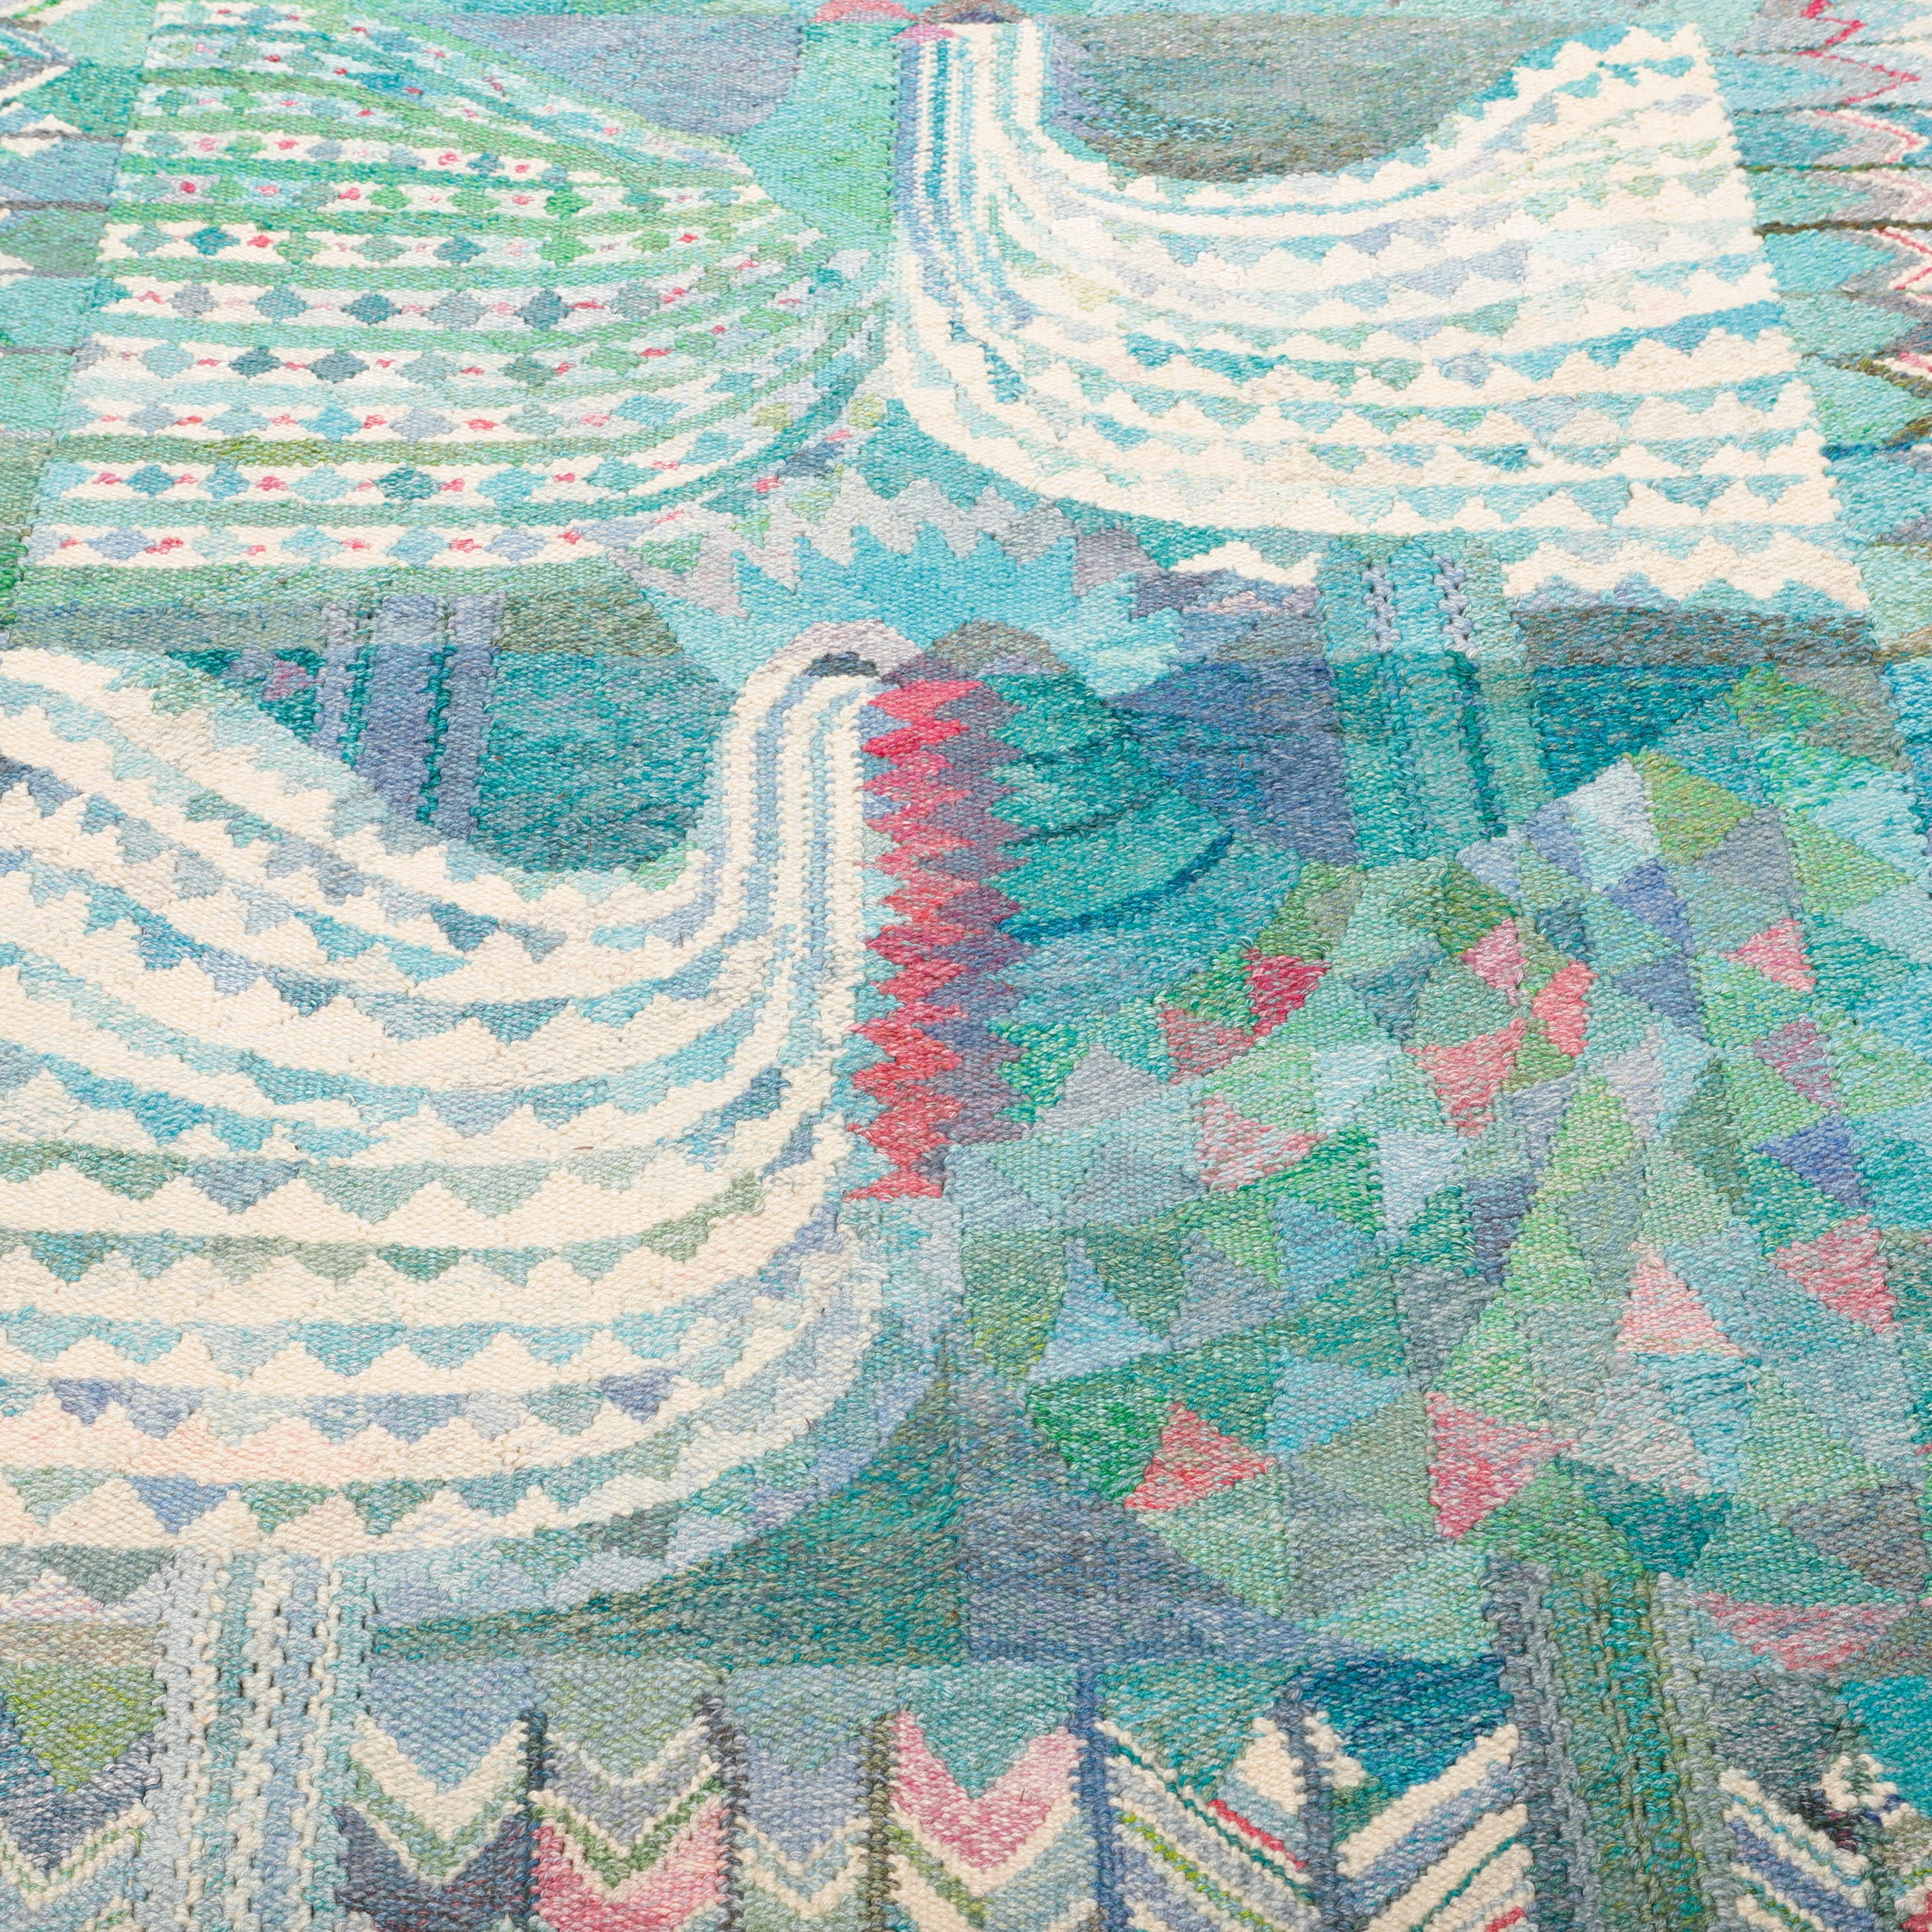 This is a rare handwoven and large tapestry designed by Marianne Richter (1916-2010) for AB Märta Måås-Fjetterströms ateliers in Båstad, Sweden. The composition is called 